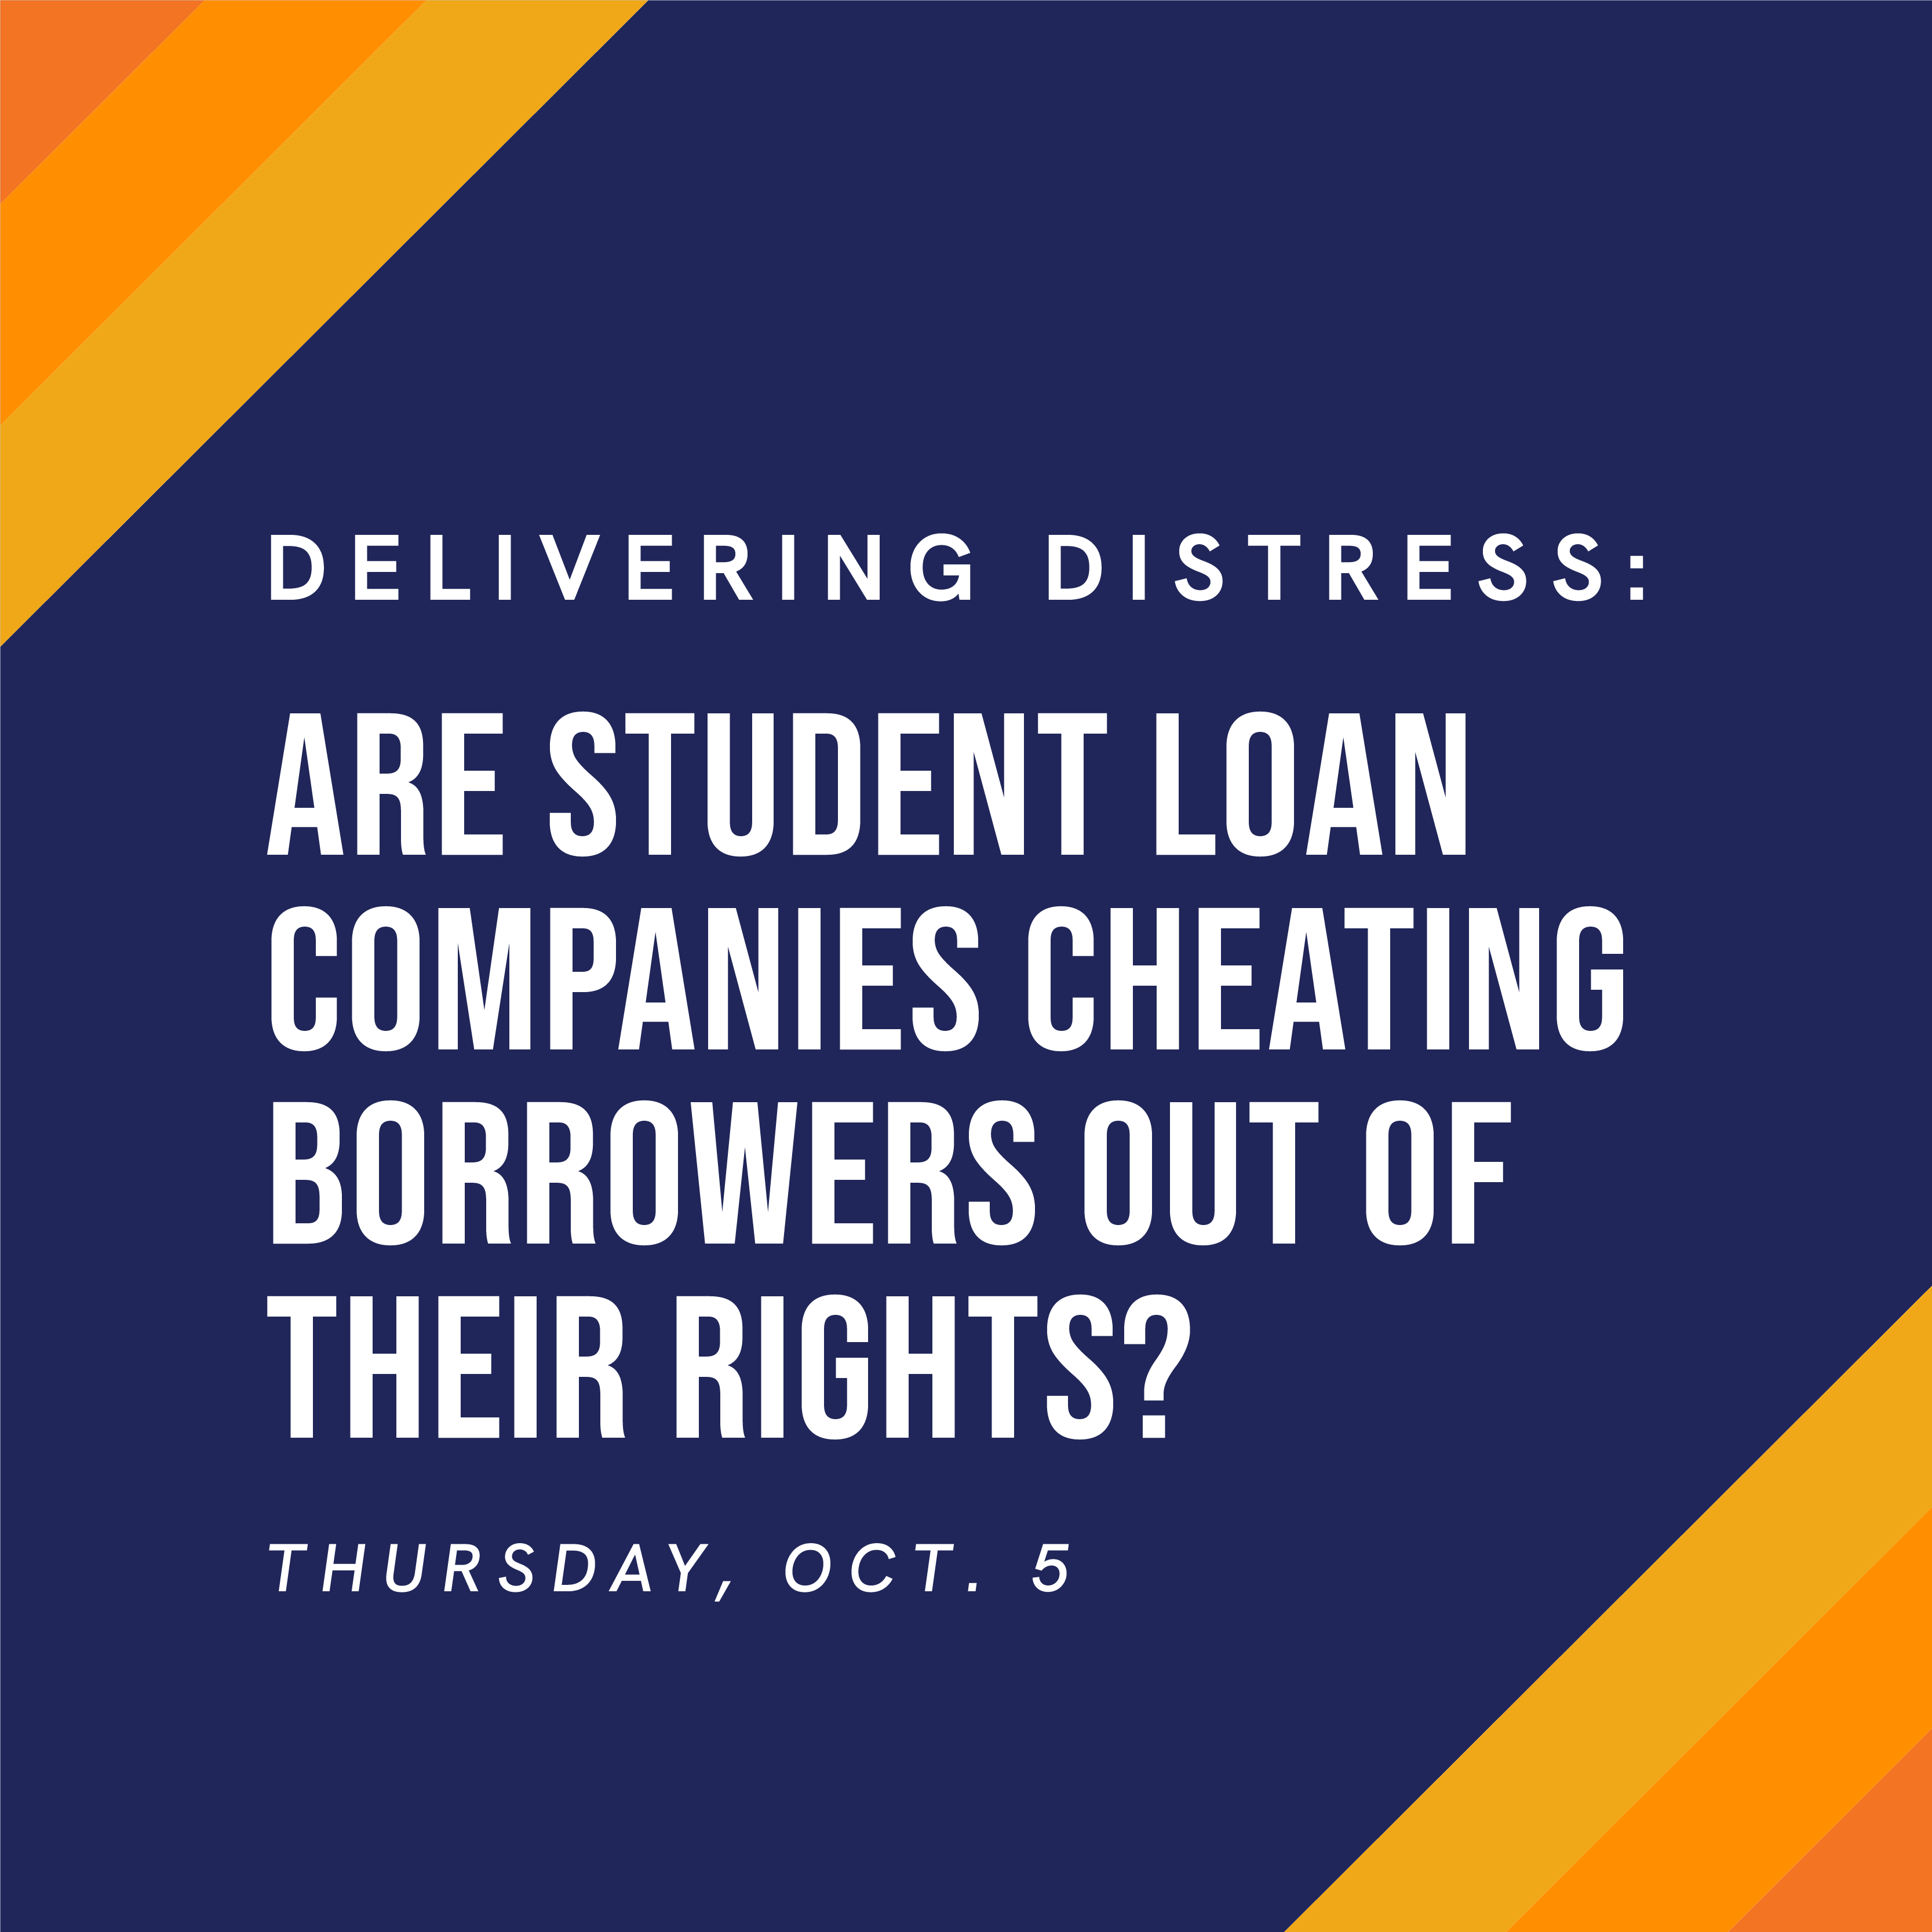 Delivering Distress: Are student loan companies cheating borrowers out of their rights? Thursday, Oct. 5